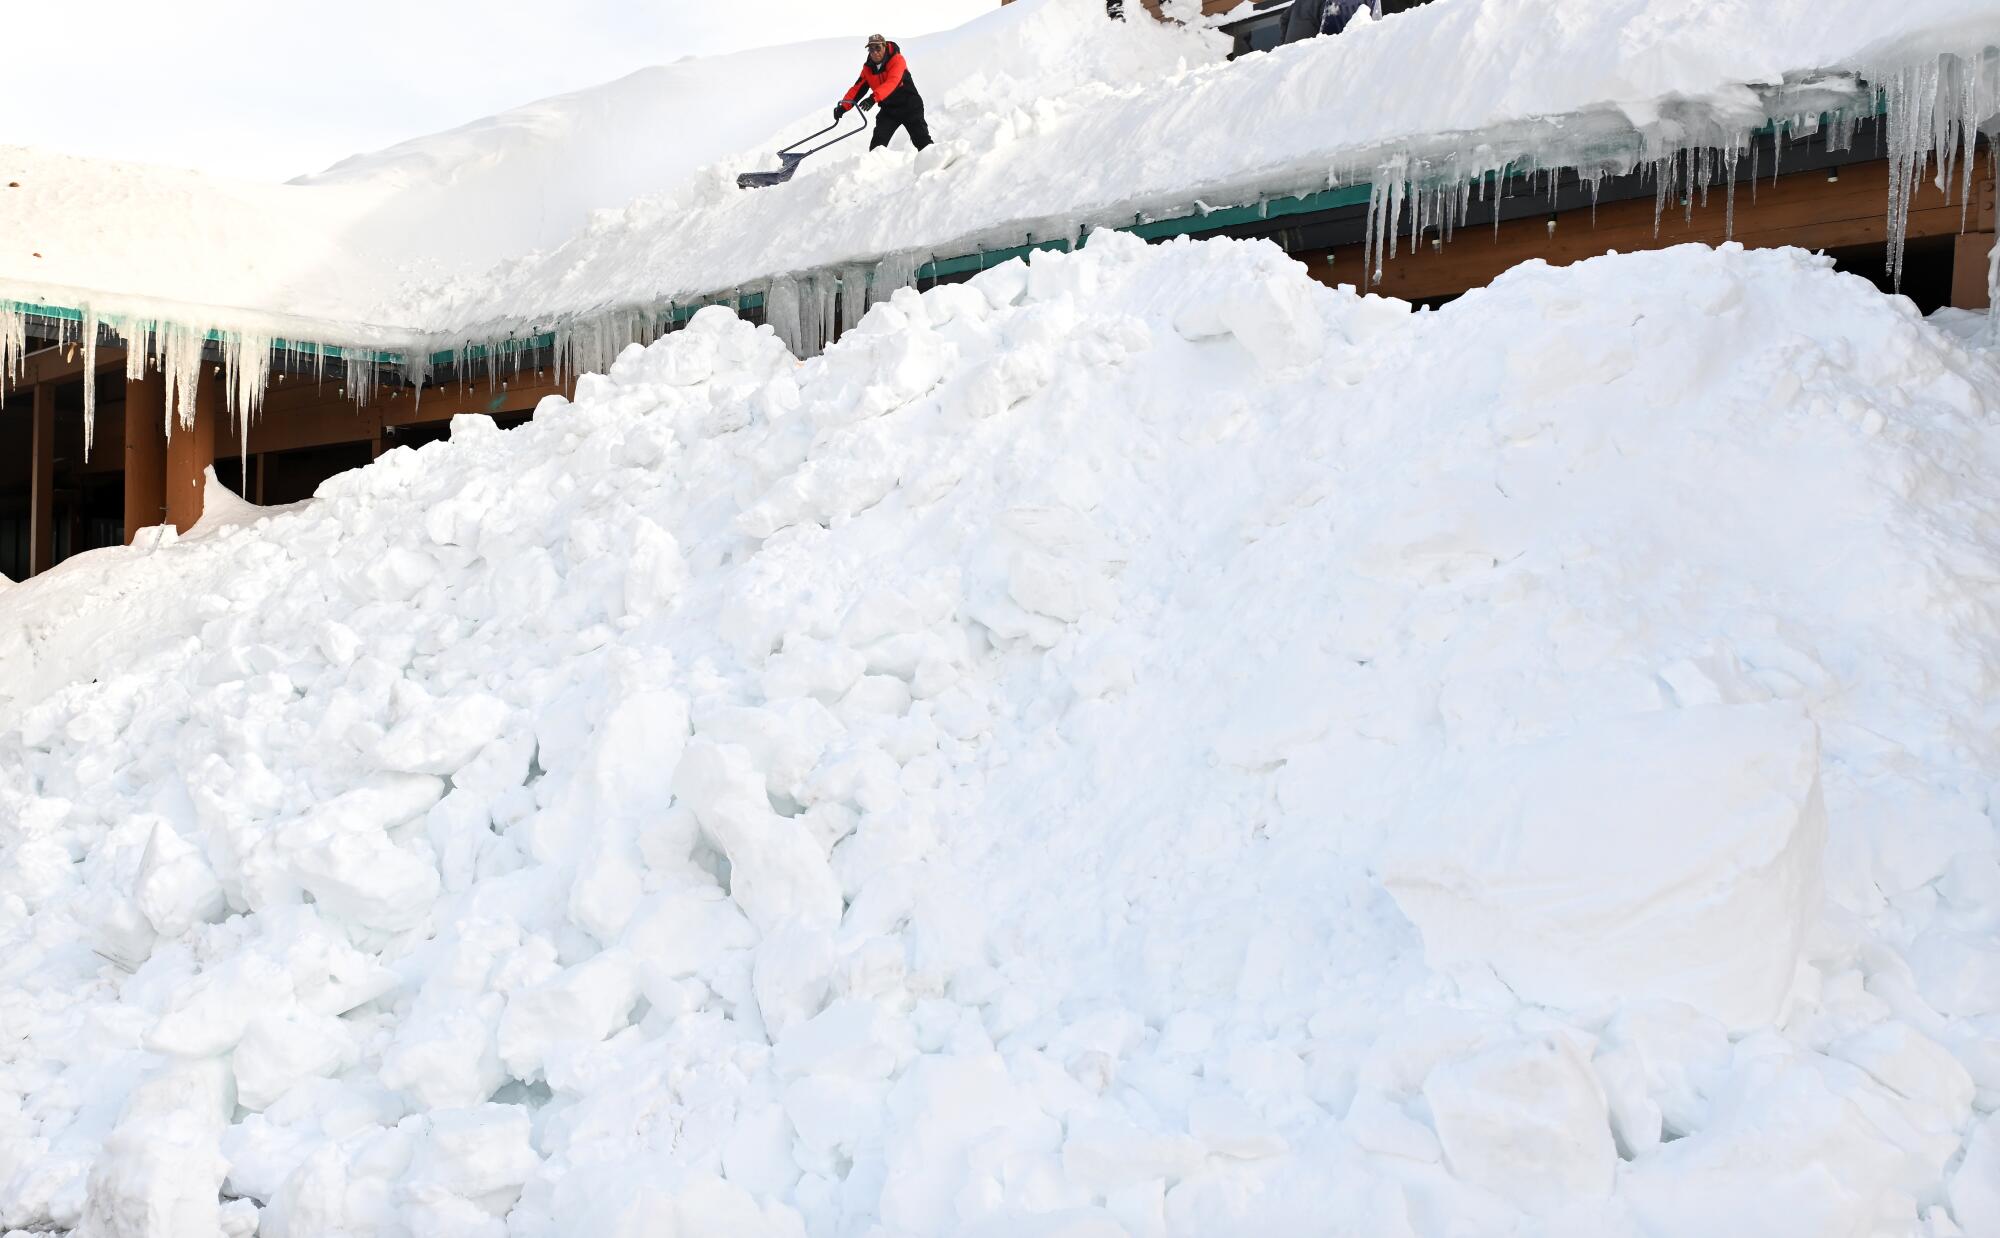 A worker is dwarfed as he shovels snow off a roof in Mammoth Lakes.